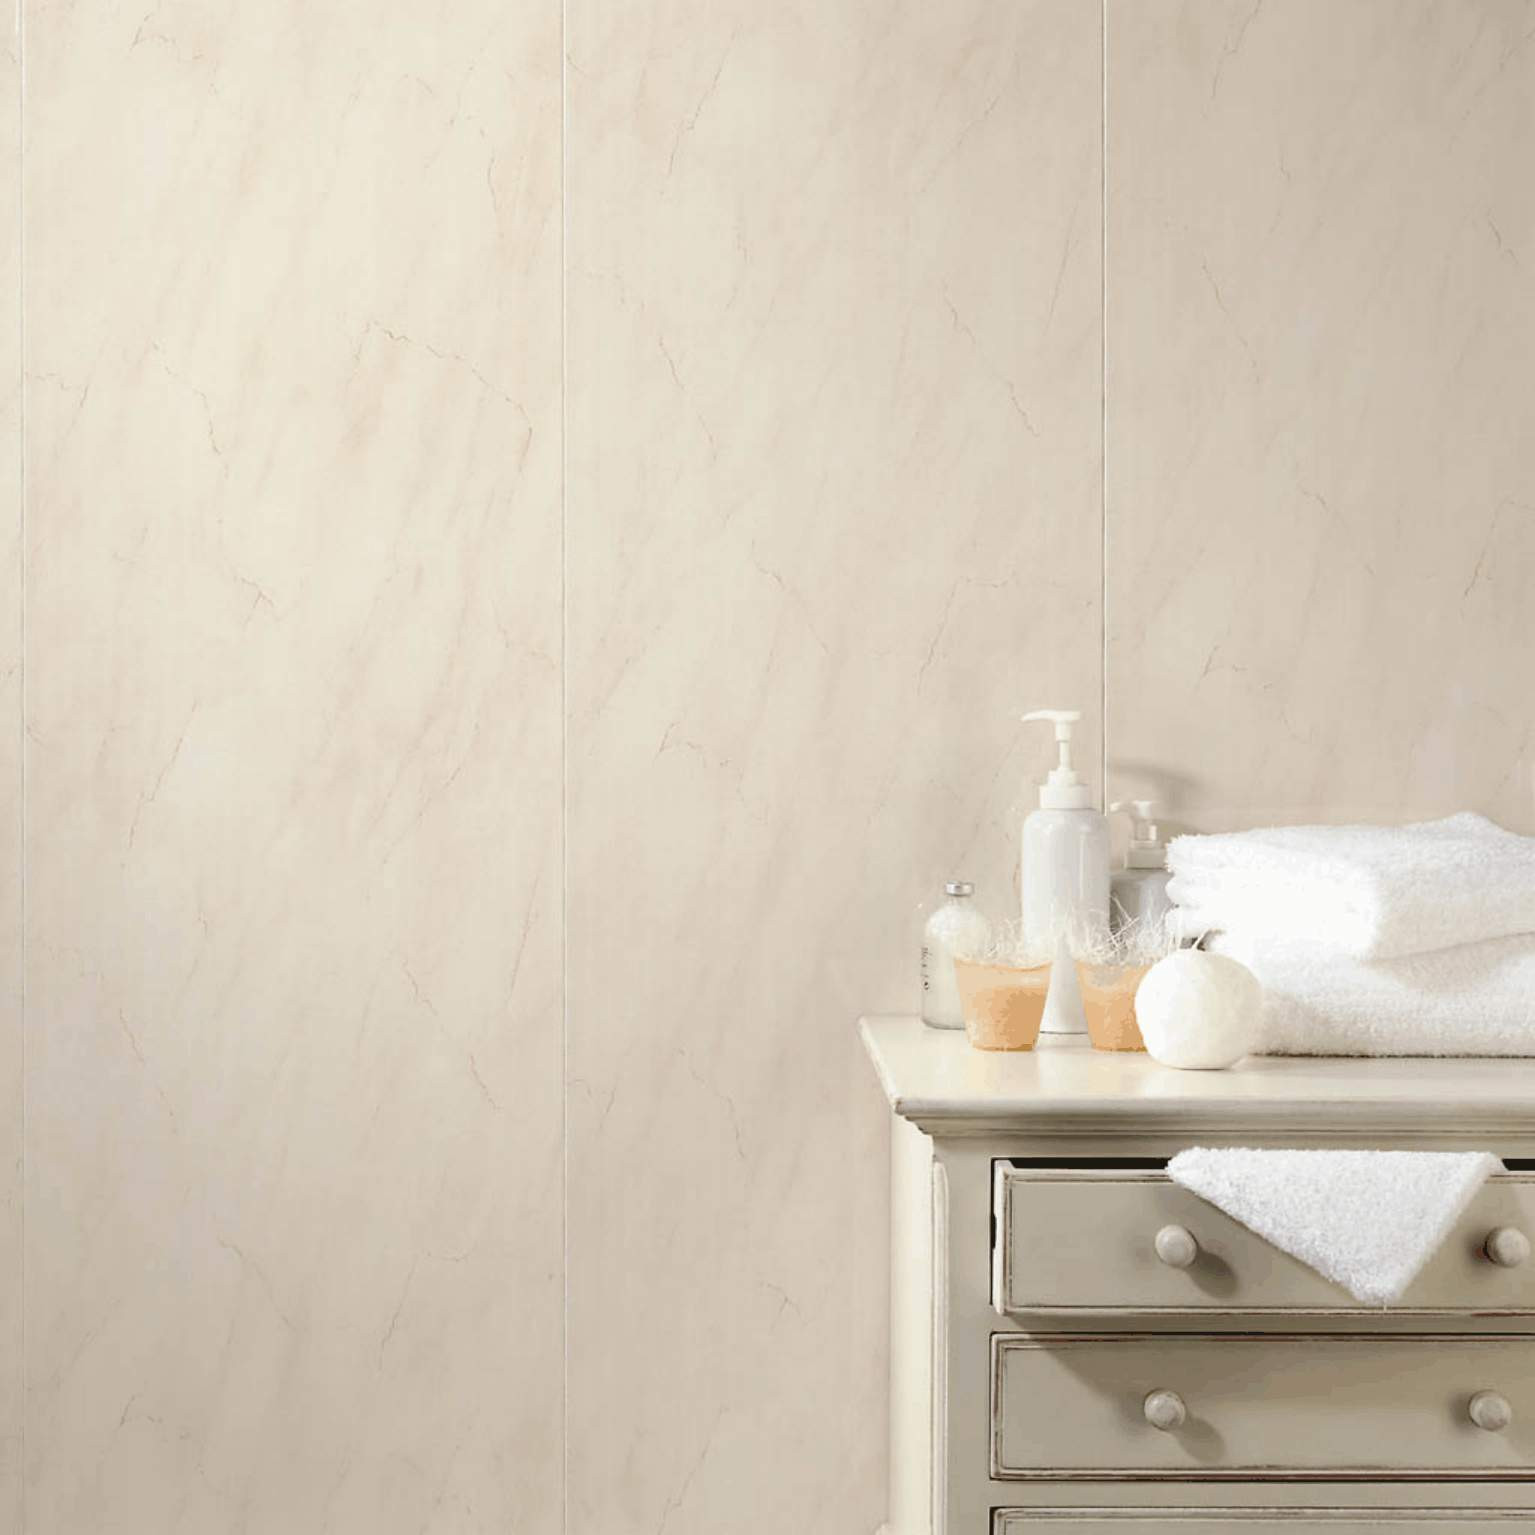 Bathroom Wall Covering Options
 Bathroom Wall Covering Options to Keep the Surface Awesome